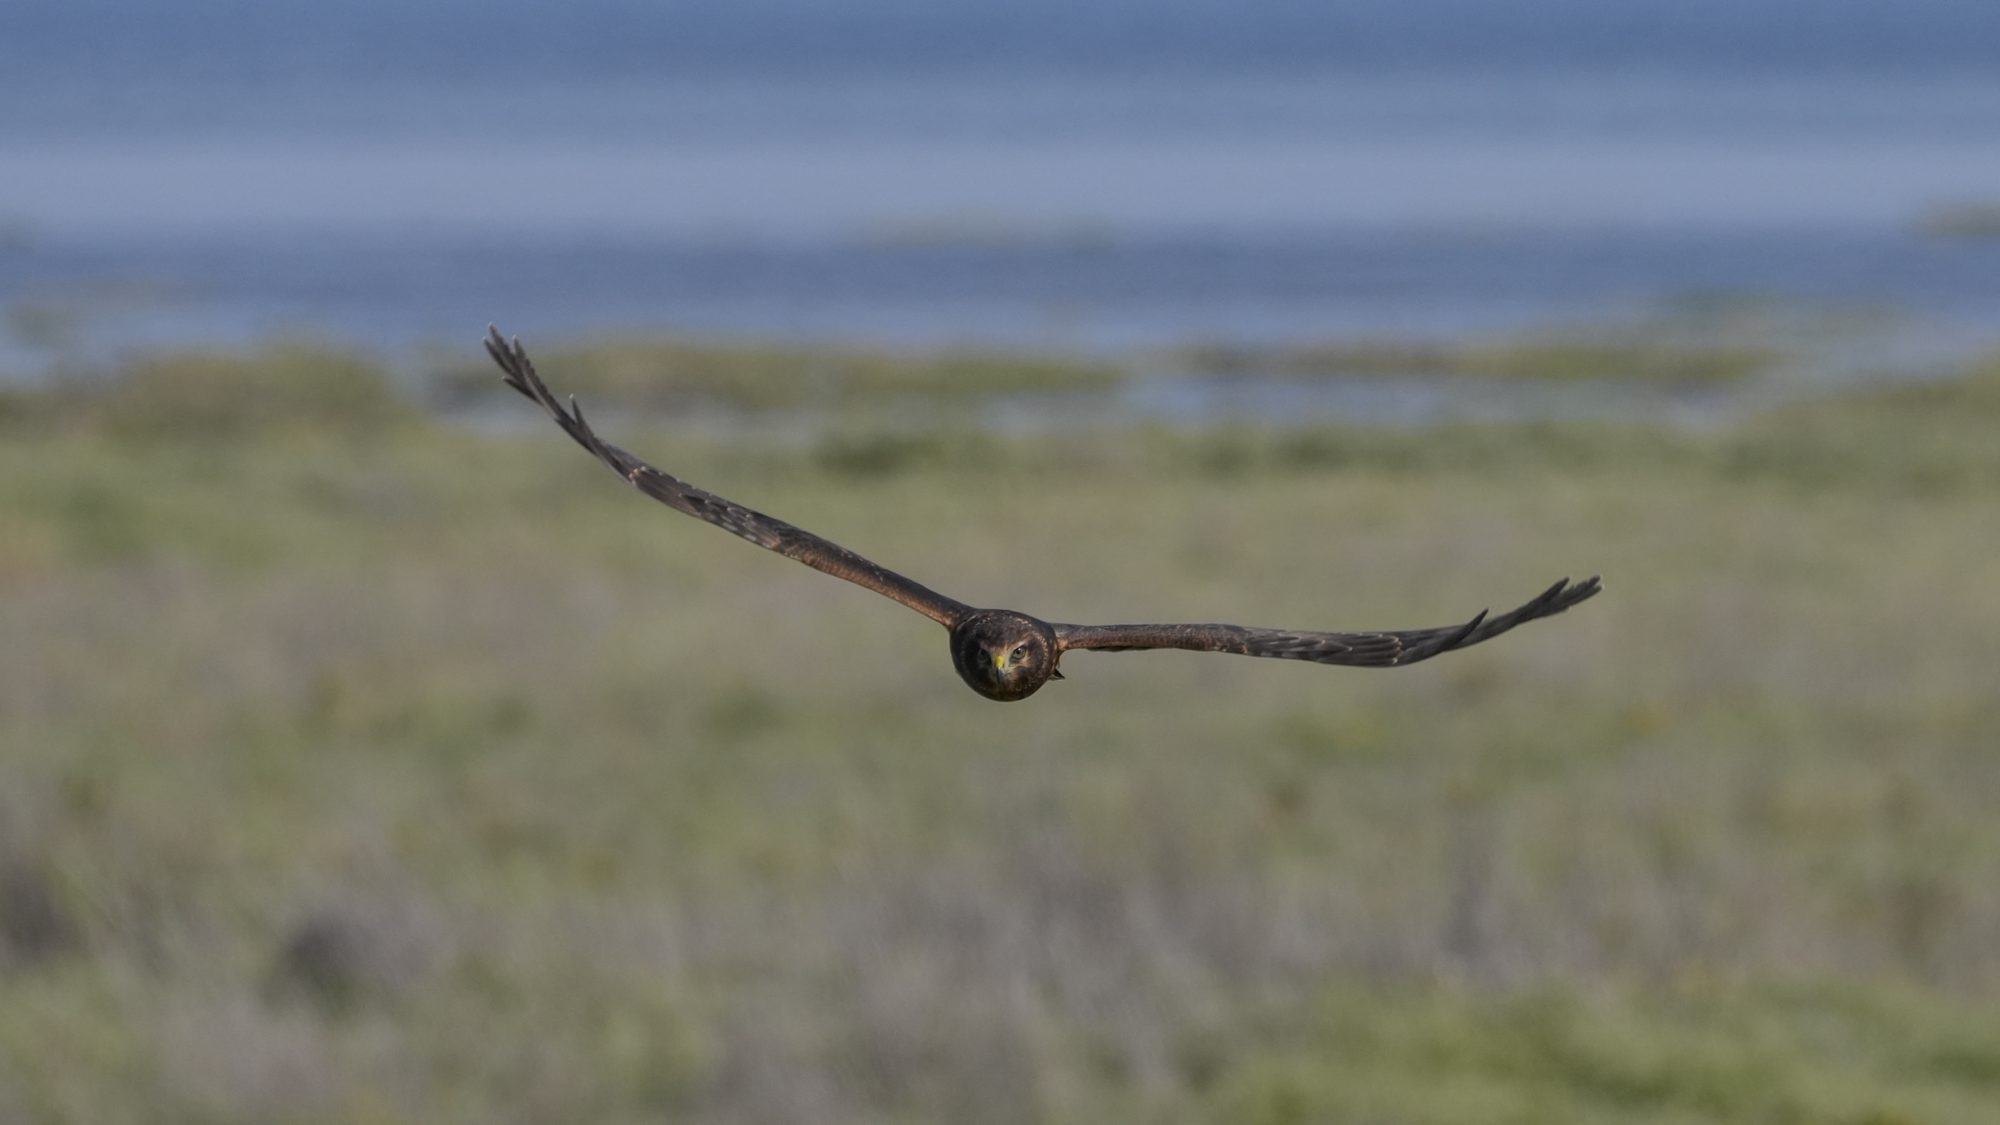 A Northern Harrier -- a raptor with a mainly brown plumage -- is flying in my general direction and looking up at me